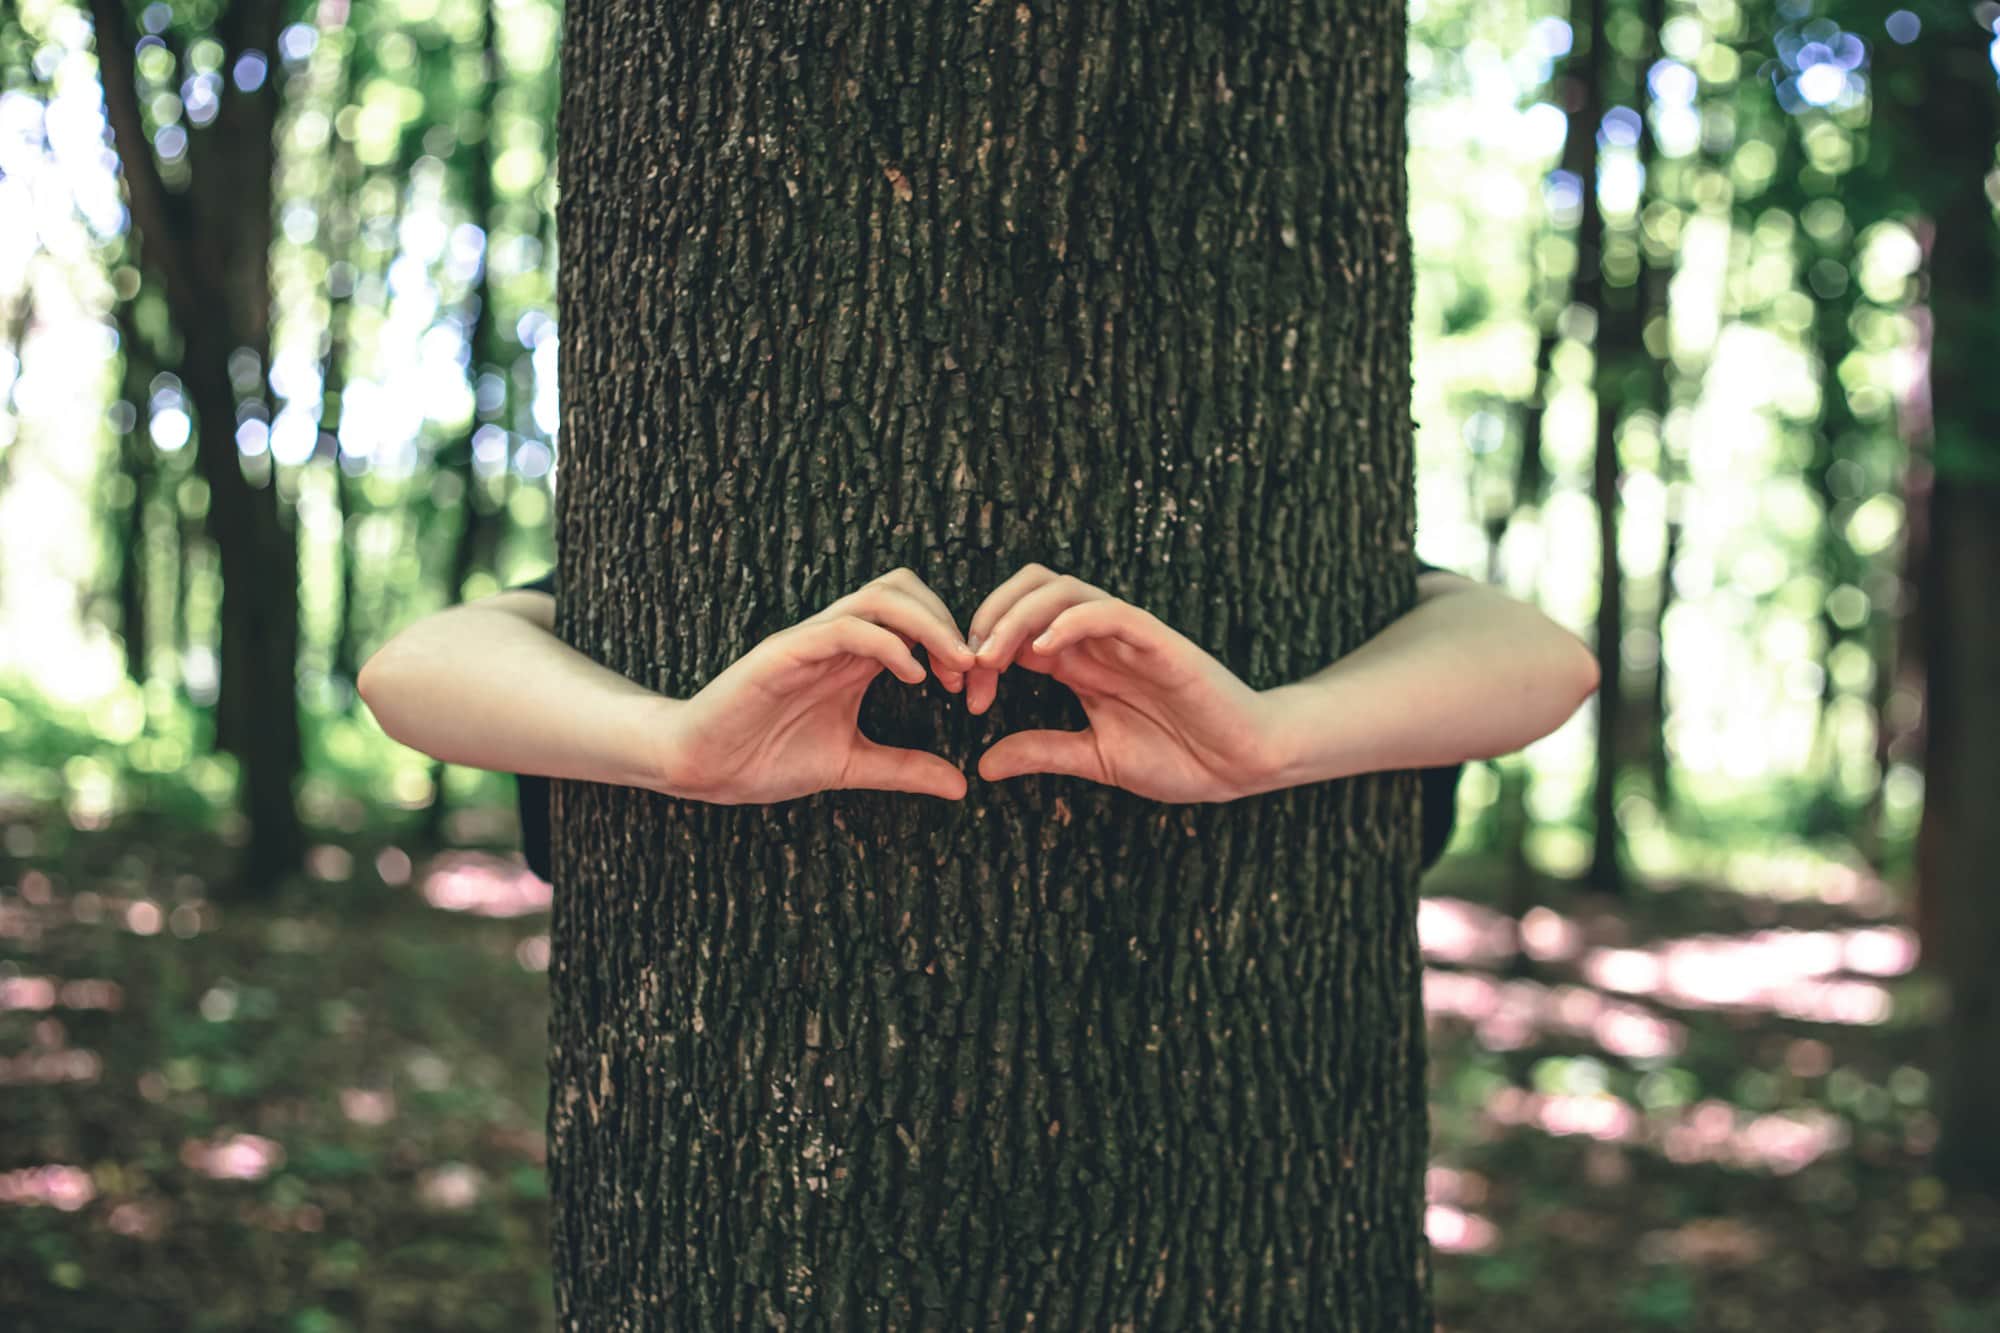 Women's hands hug a tree in the forest, love for nature.